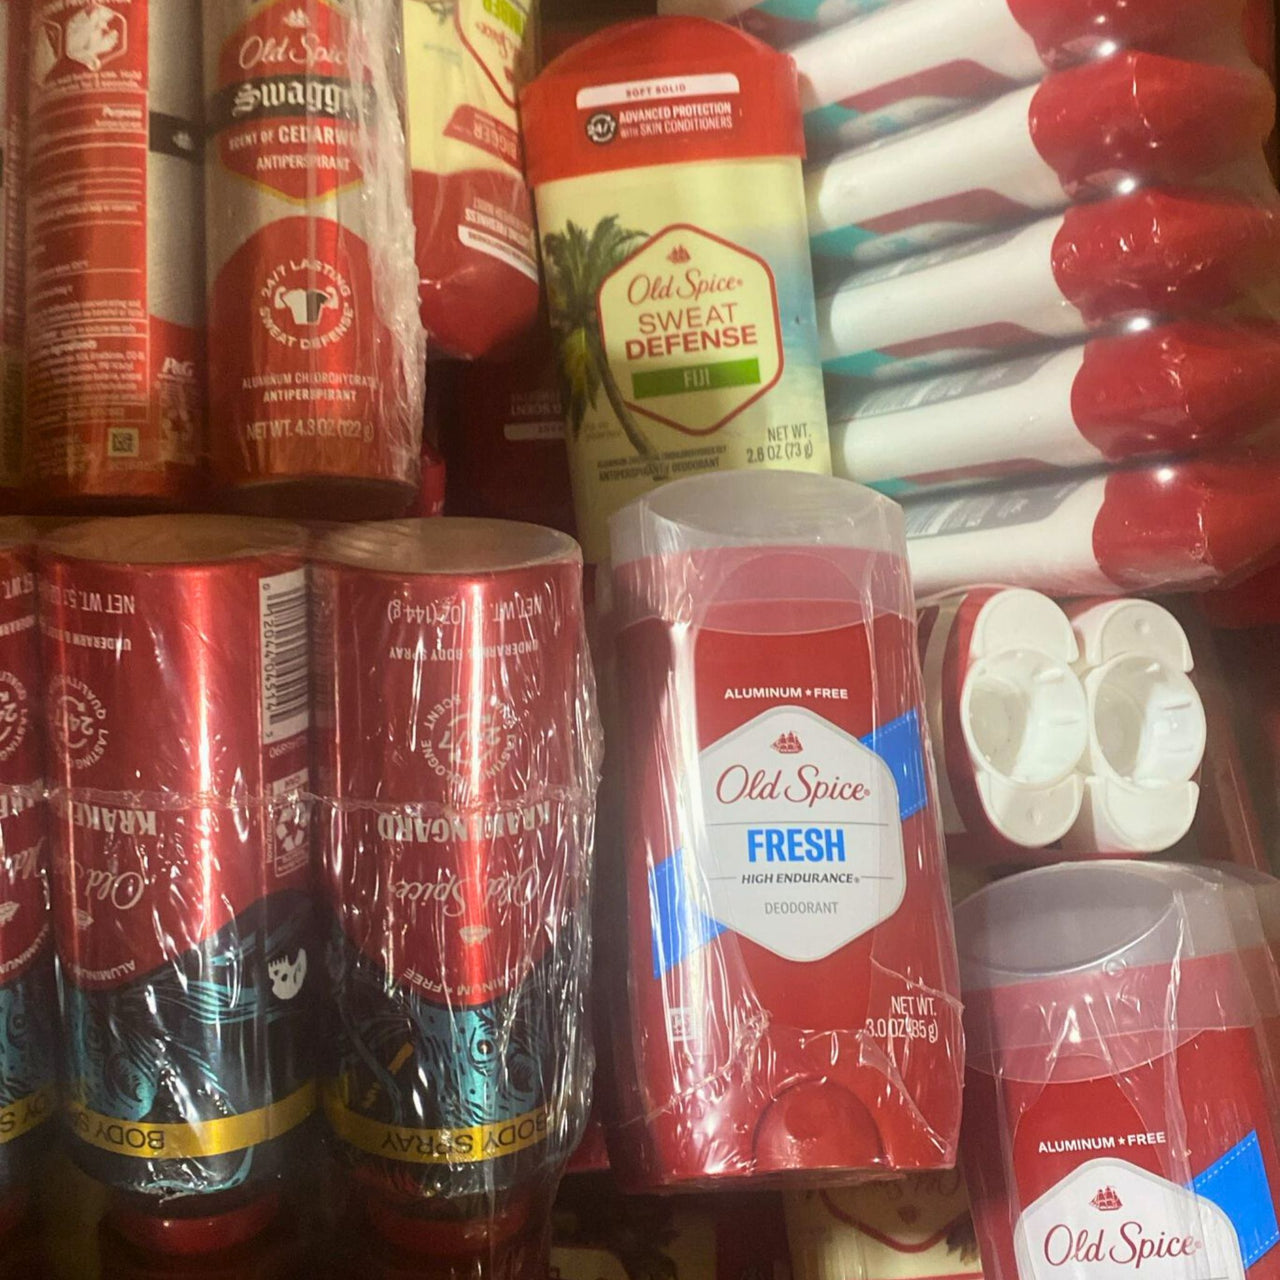 Old Spice Deodorant Assorted Mix